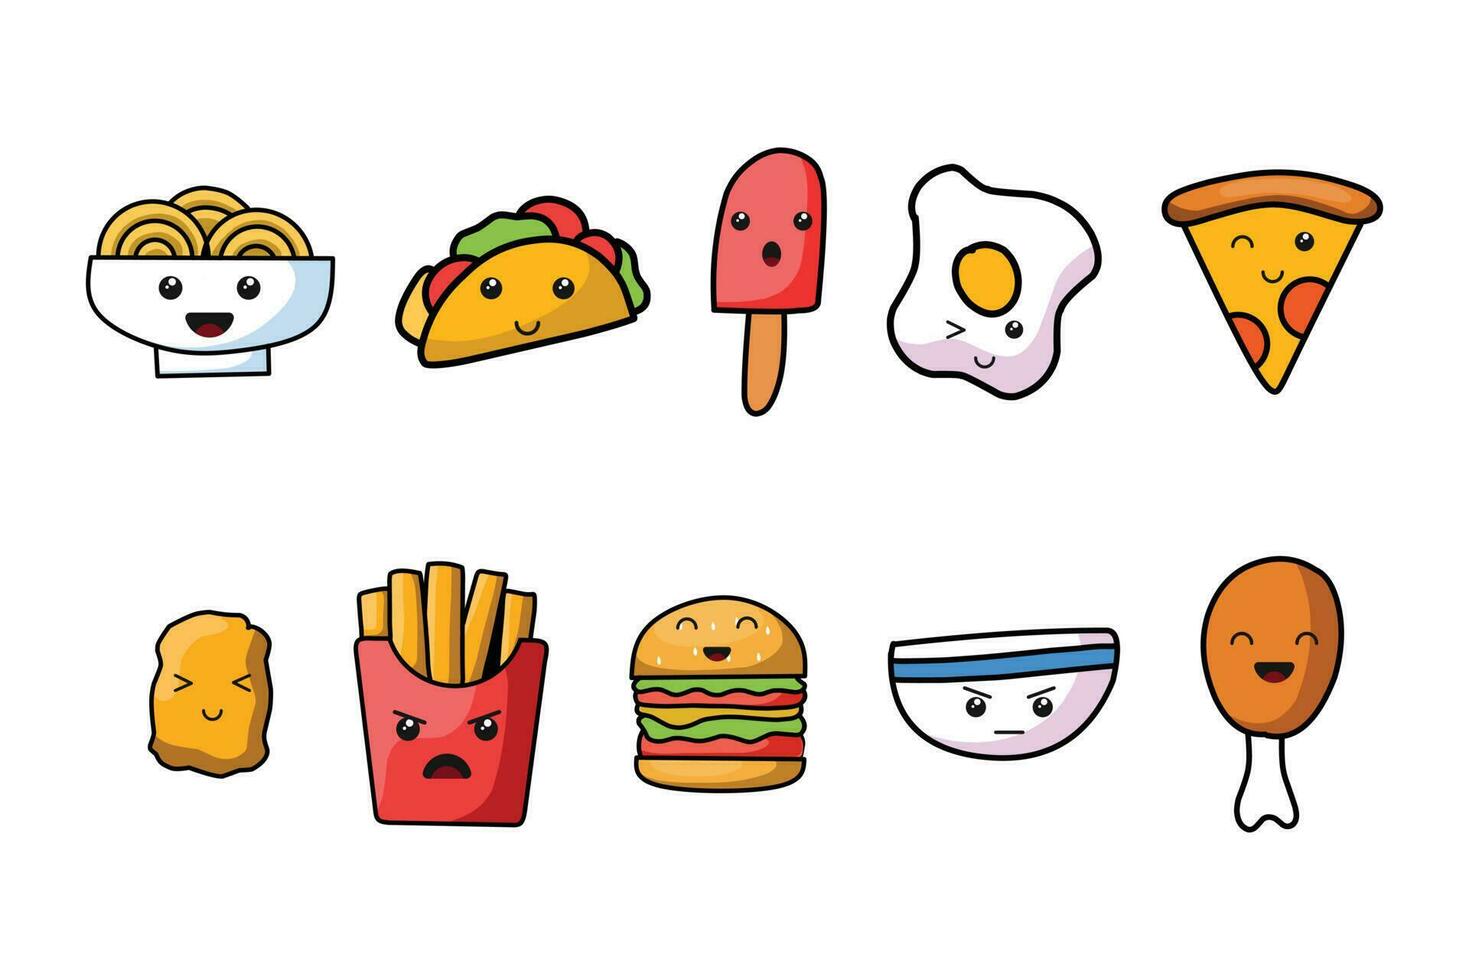 Cute Kawaii Icon Illustration Character Cartoon Vector Face Design background food japanese element sweet emoji graphic emoticon